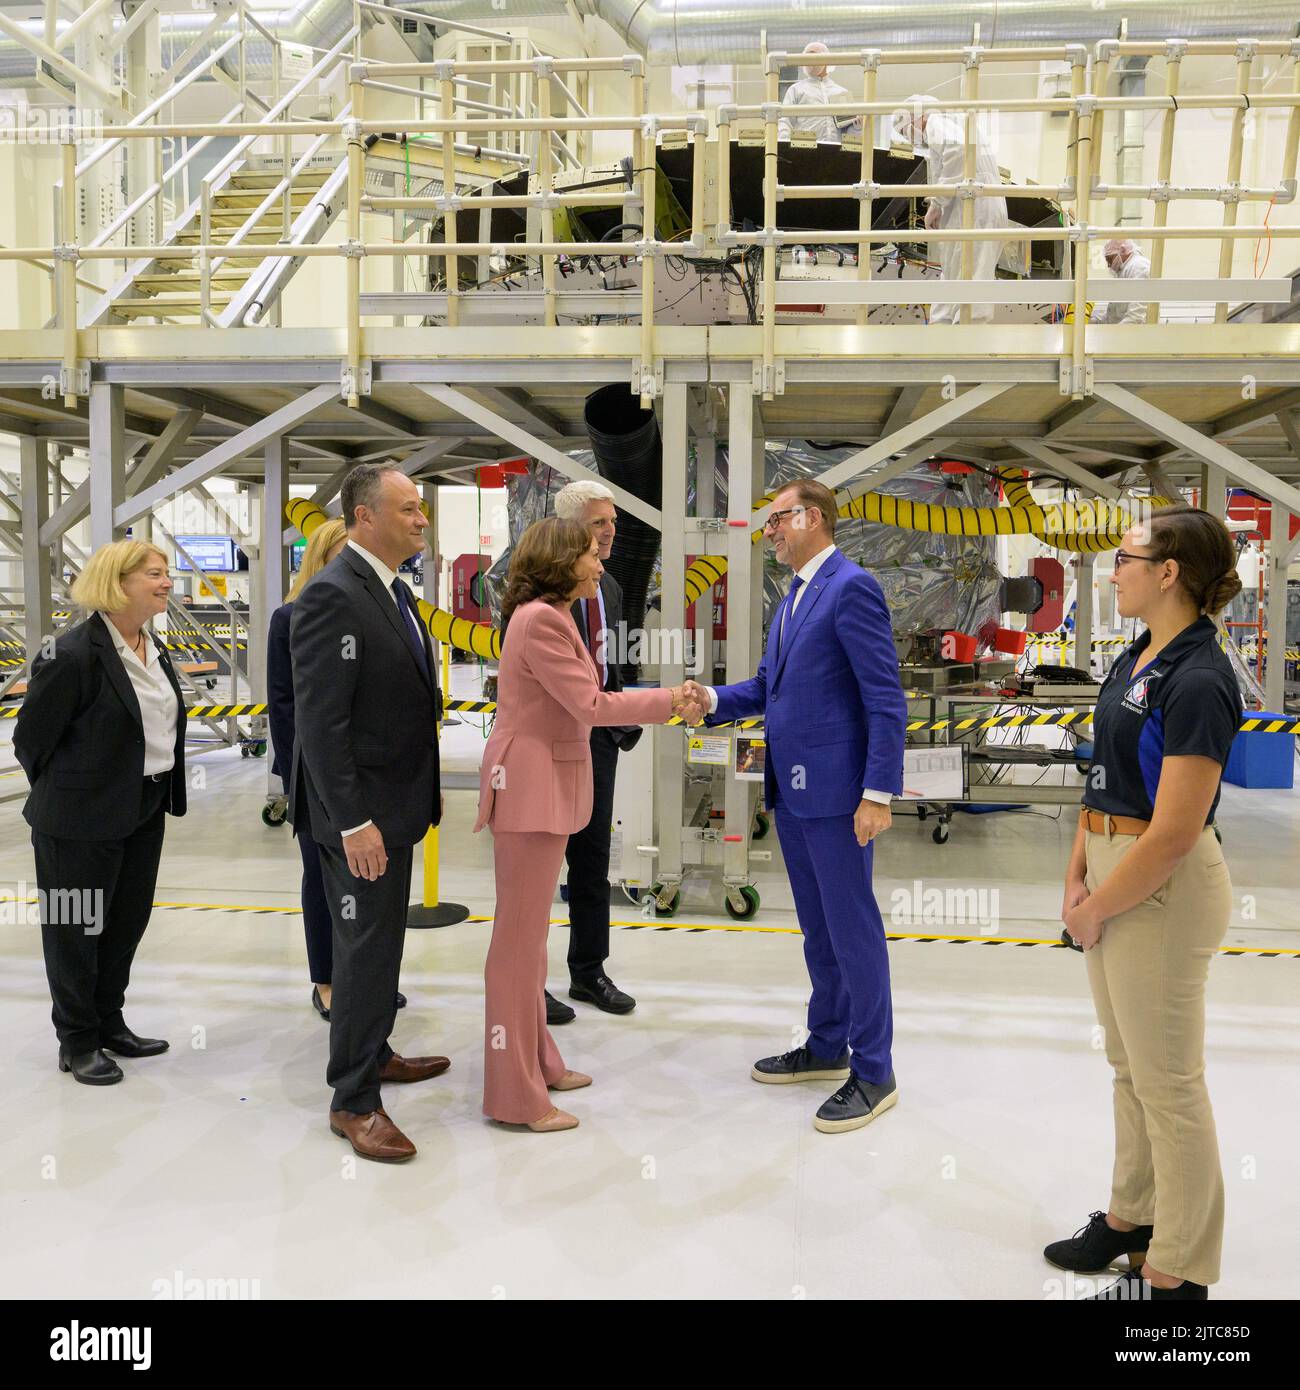 Kennedy Space Center, United States of America. 29 August, 2022. U.S. Vice President Kamala Harris shakes hands with Josef Aschbacher, Director General of ESA during a visit to view the Artemis II Service Module at the Neil A. Armstrong Operations and Checkout Building at the Kennedy Space Center, August 29, 2022, in Cape Canaveral, Florida. The countdown for the un-crewed Artemis I flight test was later halted after a problem with the fuel system caused an extended delay. Credit: Bill Ingalls/NASA/Alamy Live News Stock Photo